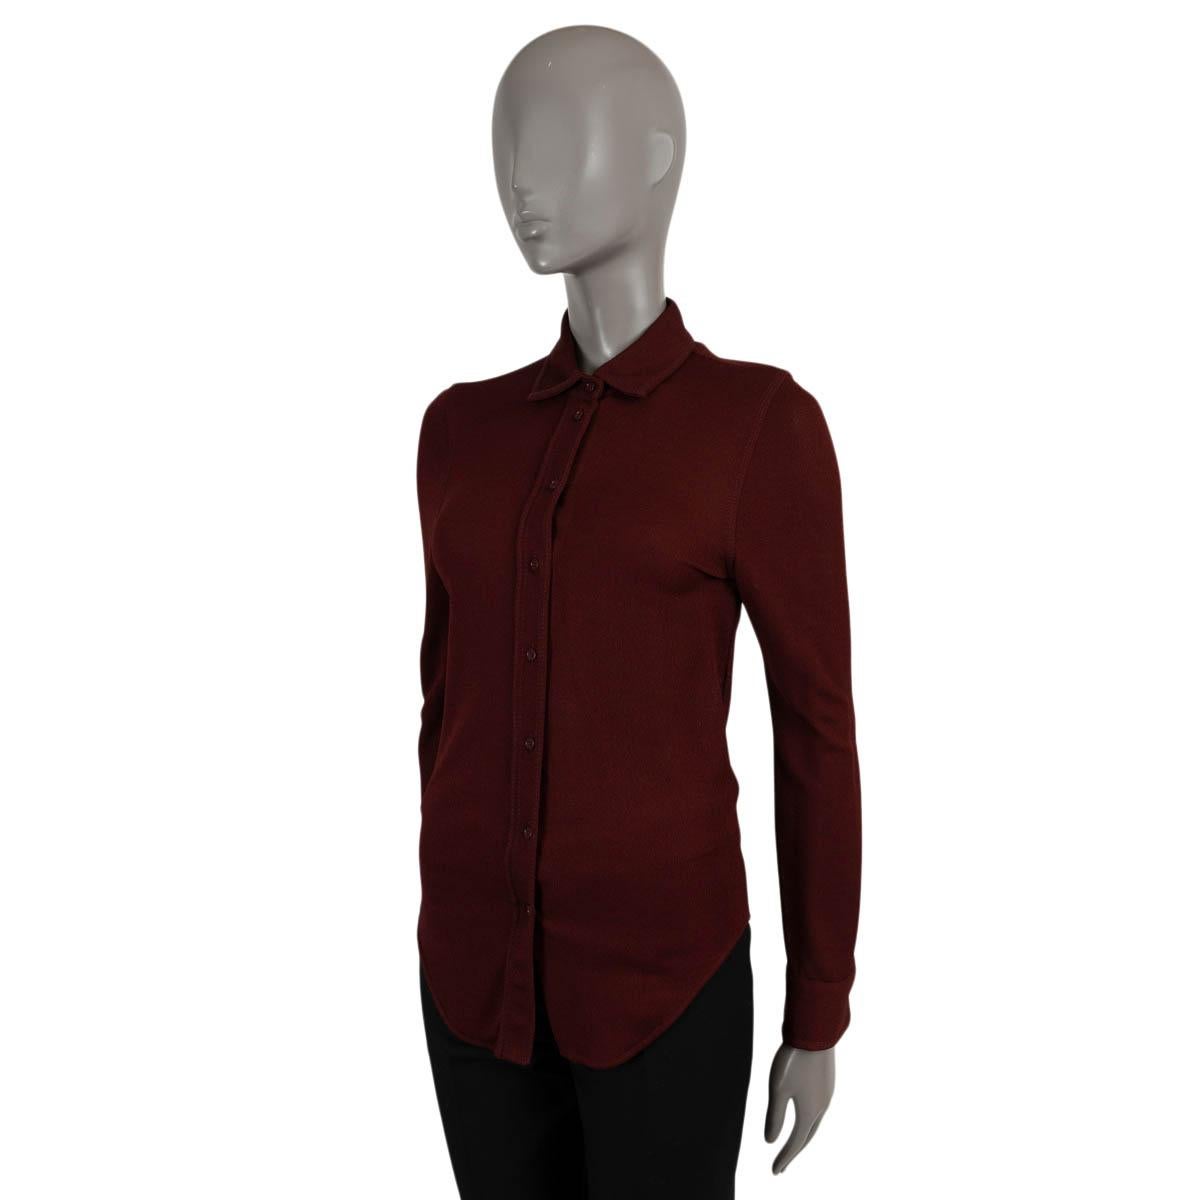 100% authentic Bottega Veneta button-up shirt in Merlot (burgundy) viscose jersey (100%). Features a curved bottom hem and buttoned cuffs. Closes with buttons on the front. Has been worn and is in excellent condition.

2019